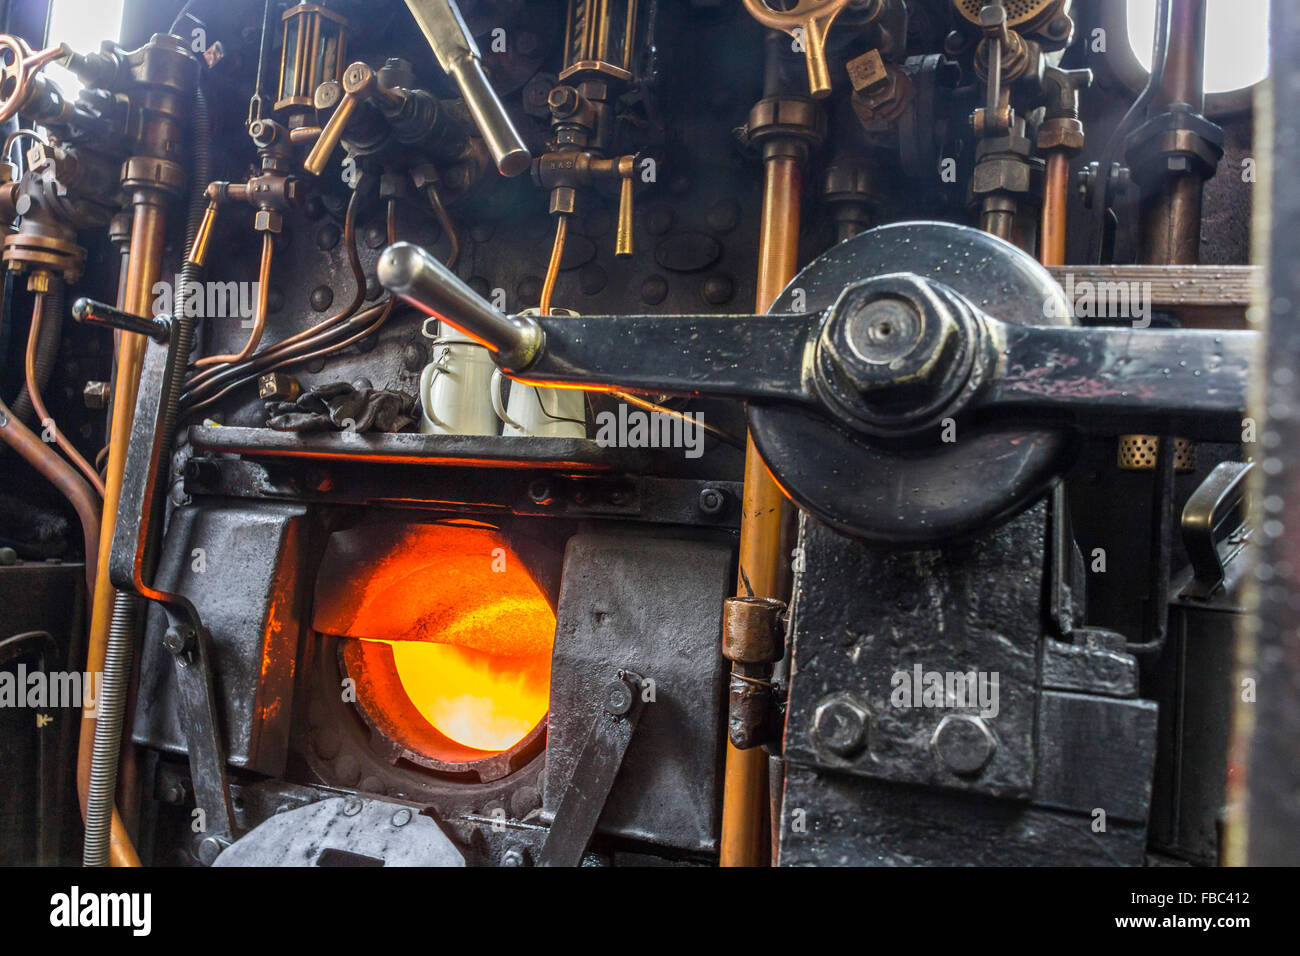 Fire box on a steam locomotive with controls and copper pipes Stock Photo